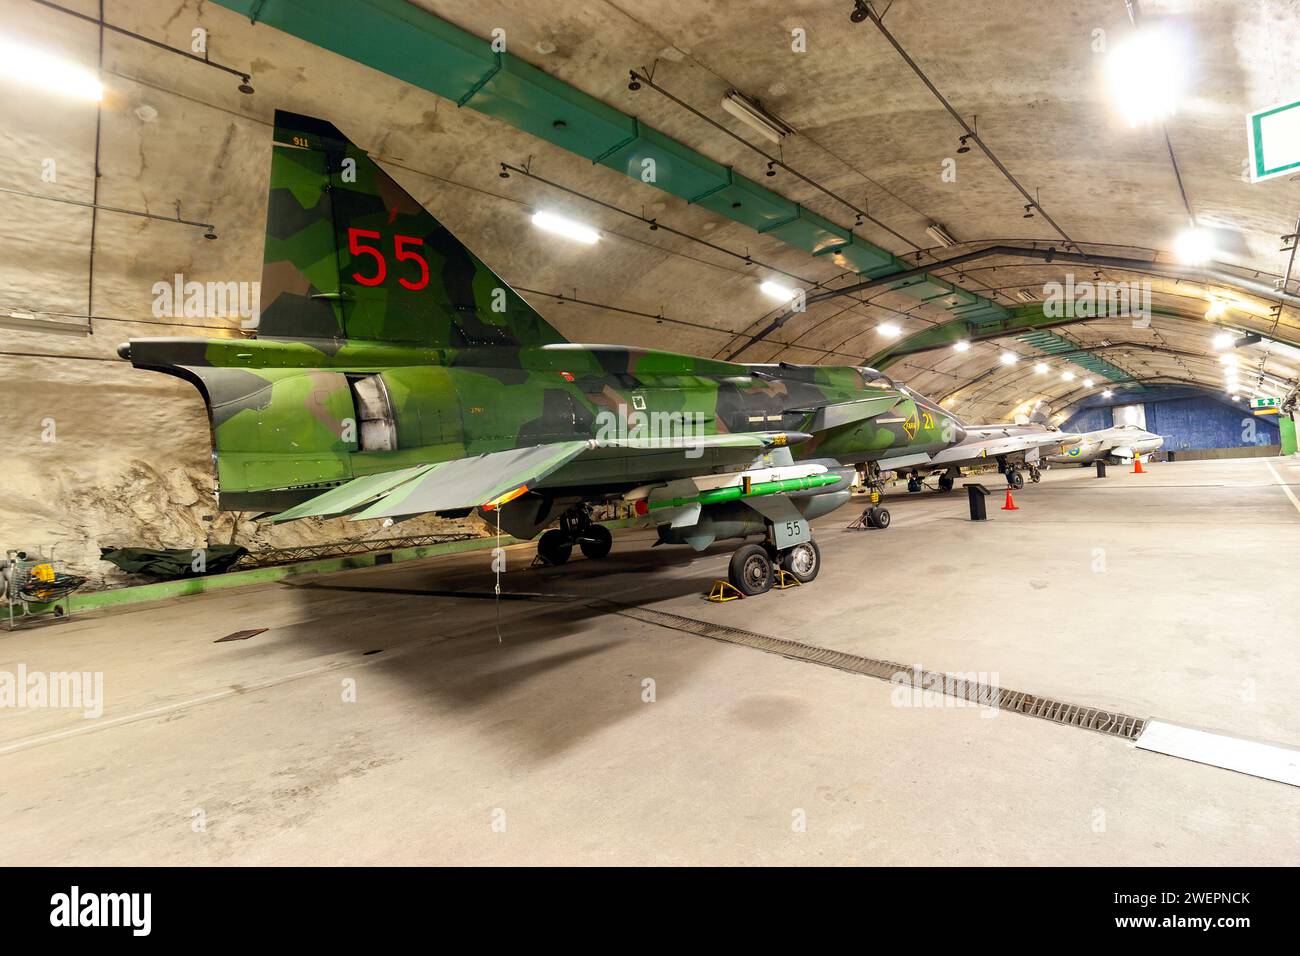 Swedish Air Force Saab J-37 Viggen fighter jet inside Aeroseum, a declassified Swedish Air Force bunker carved out of solid rock. July 10, 2011 Stock Photo